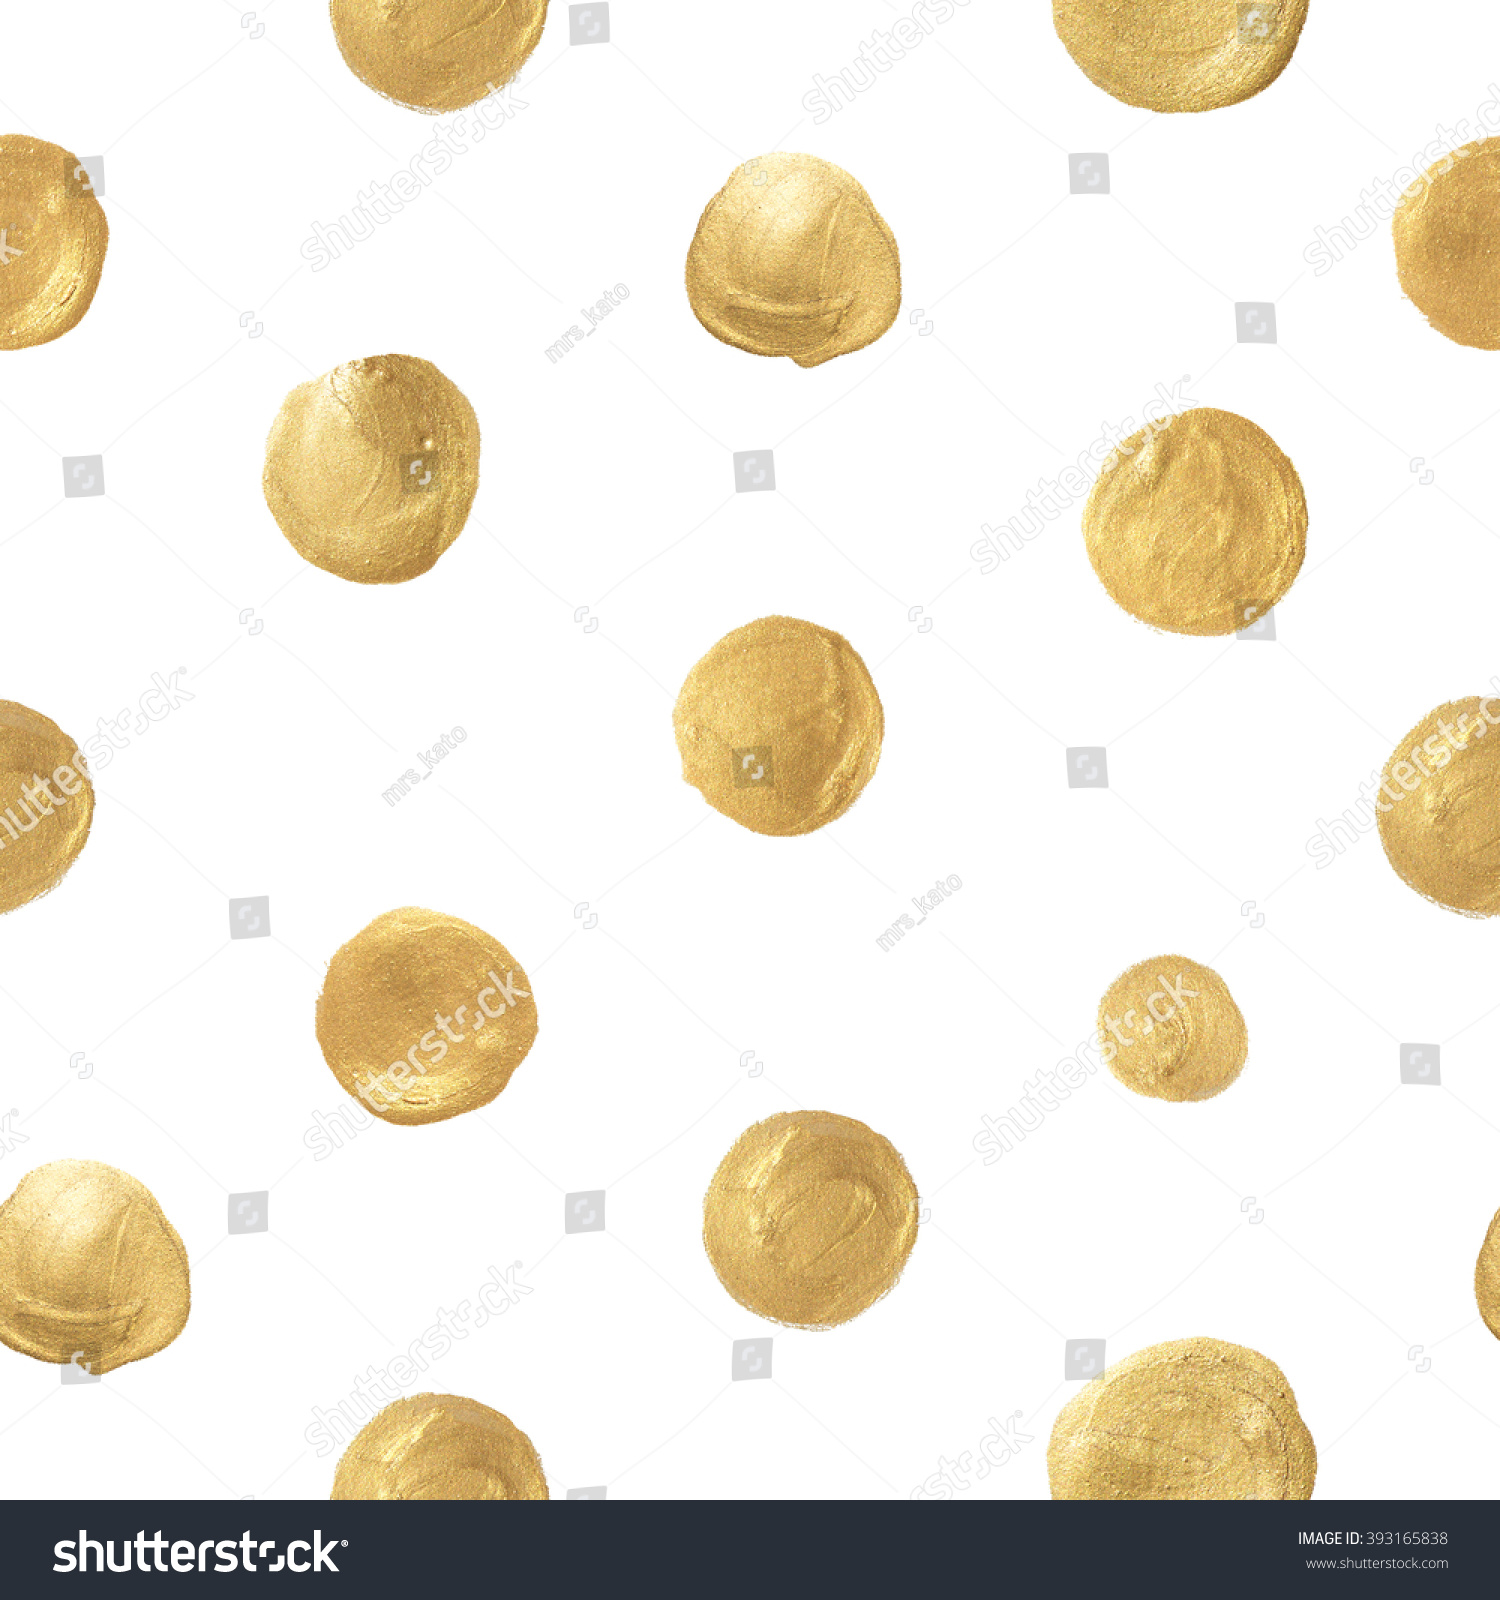 Seamless pattern with polka dots. Painted golden circles on white background.  #393165838